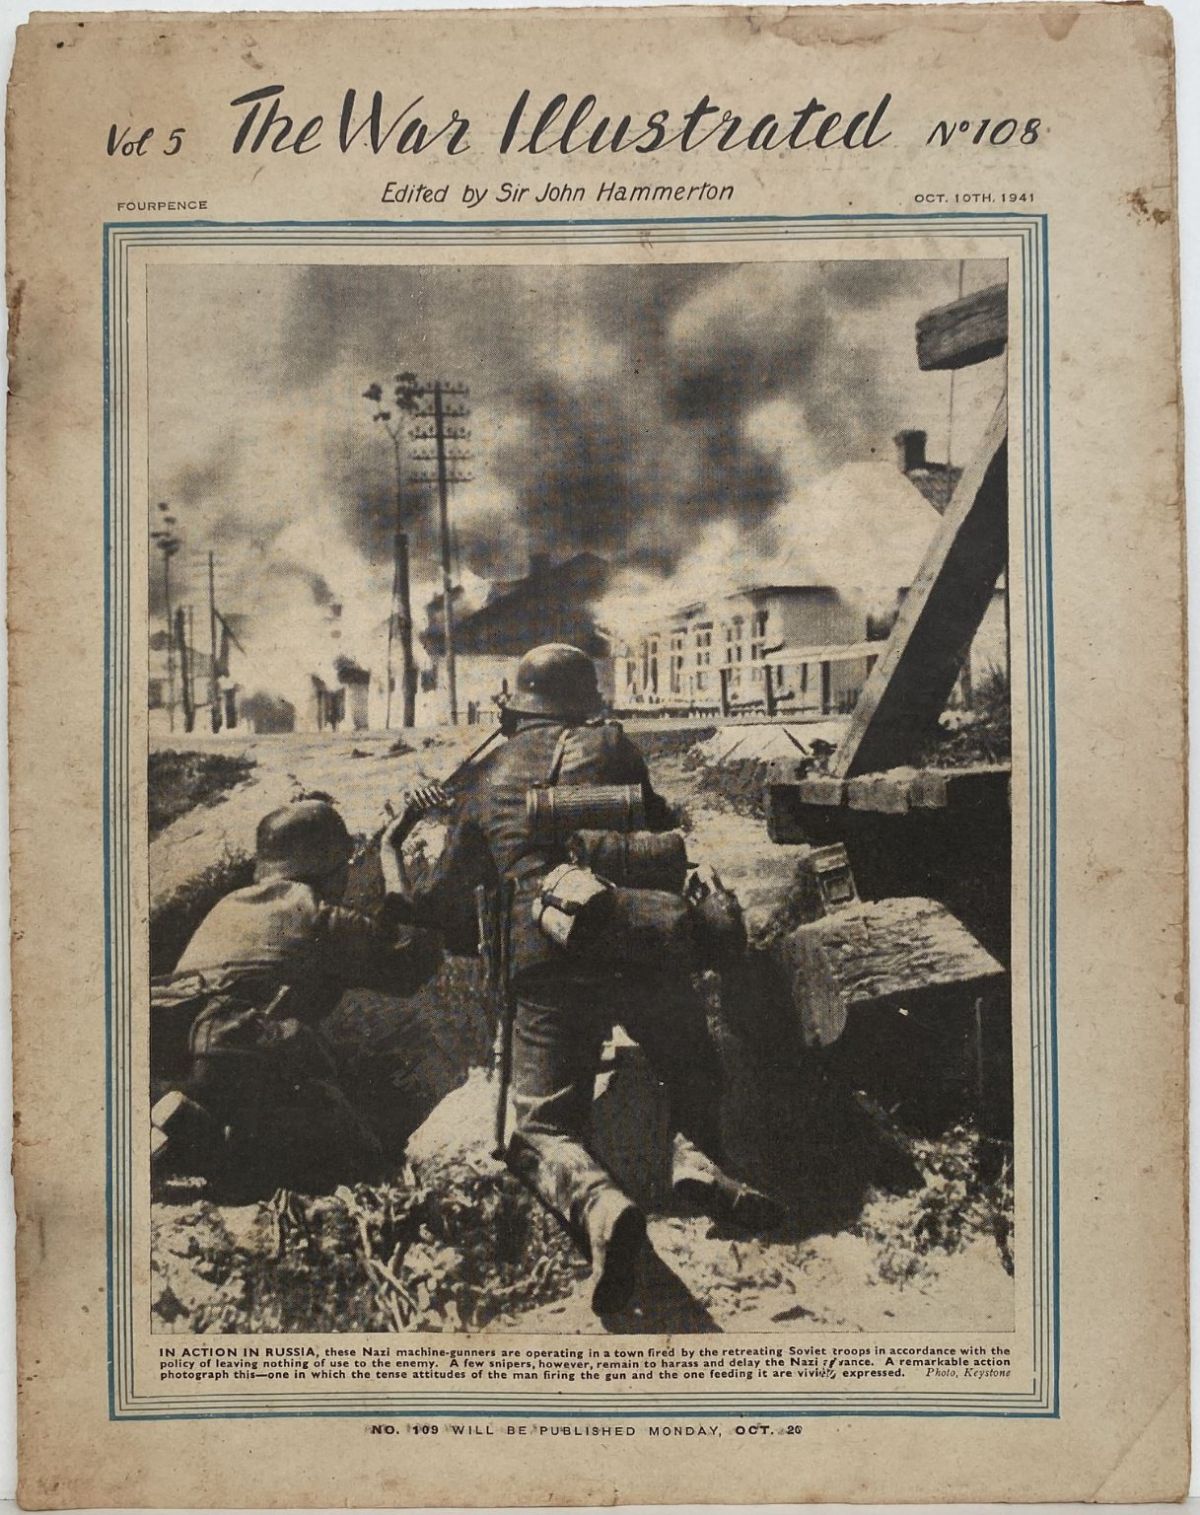 THE WAR ILLUSTRATED - Vol 5, No 108, 10th Oct 1941